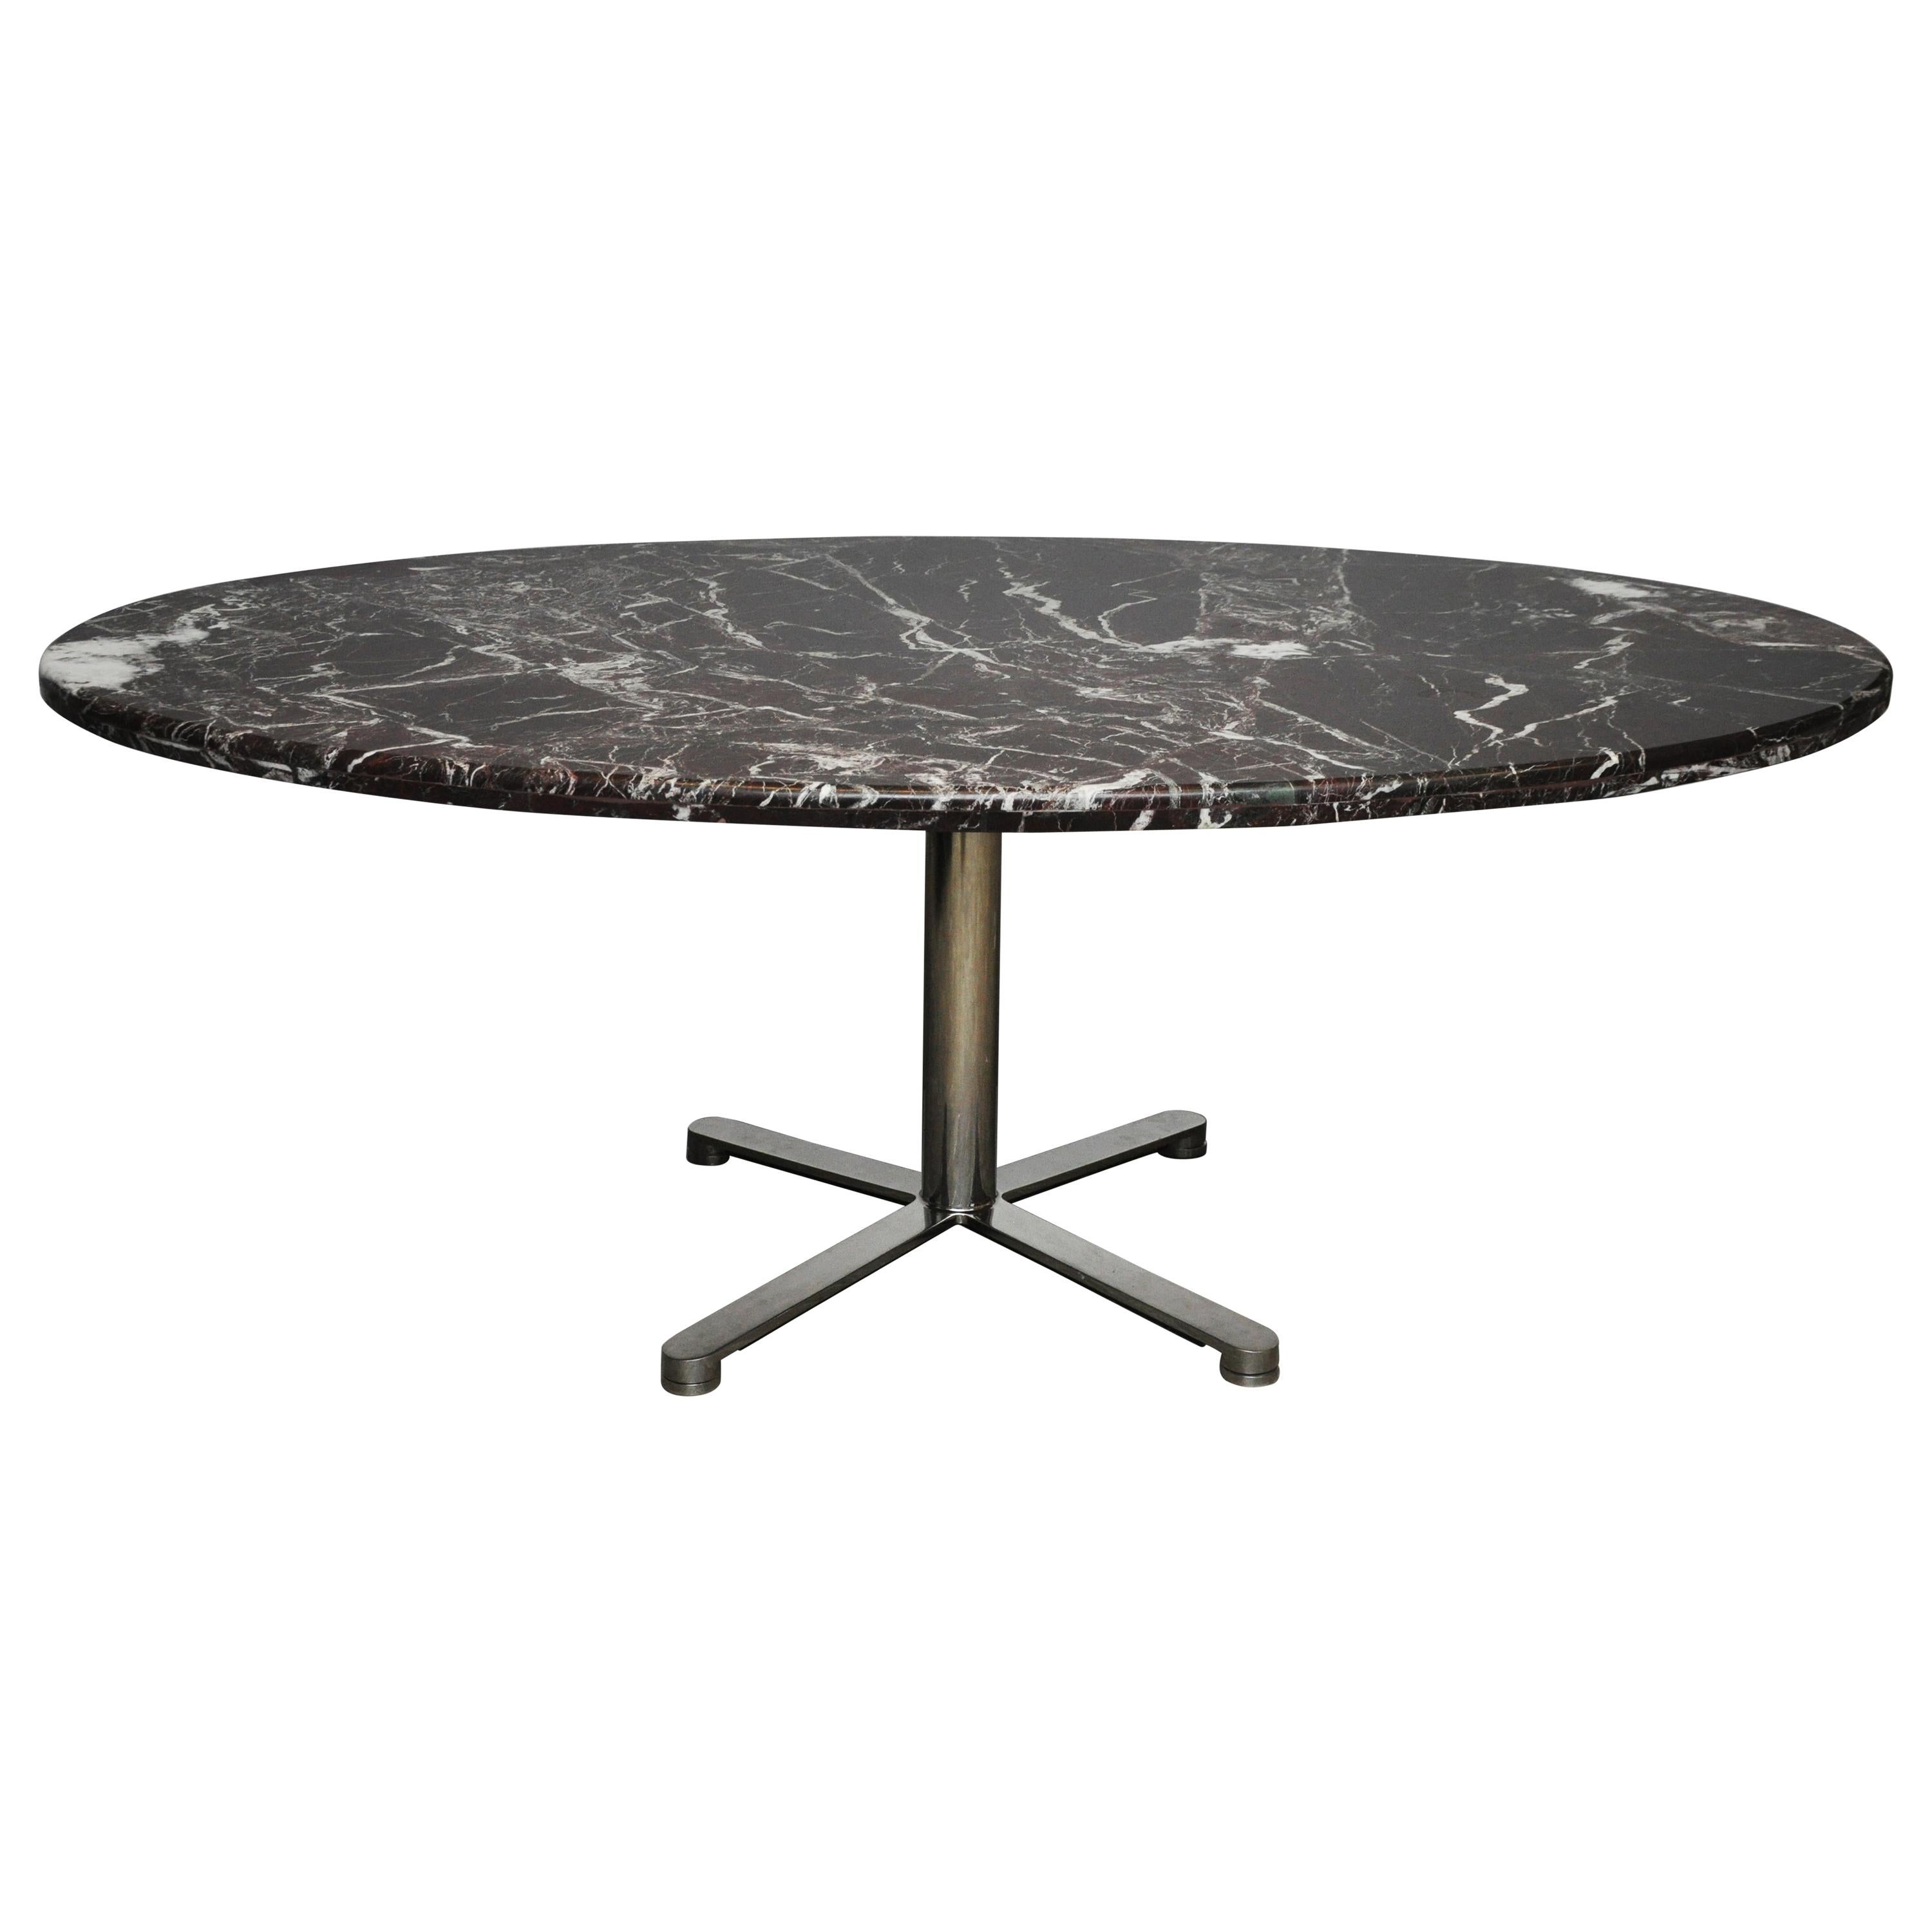 Nicos Zographos Marble and Stainless Steel Dining Table